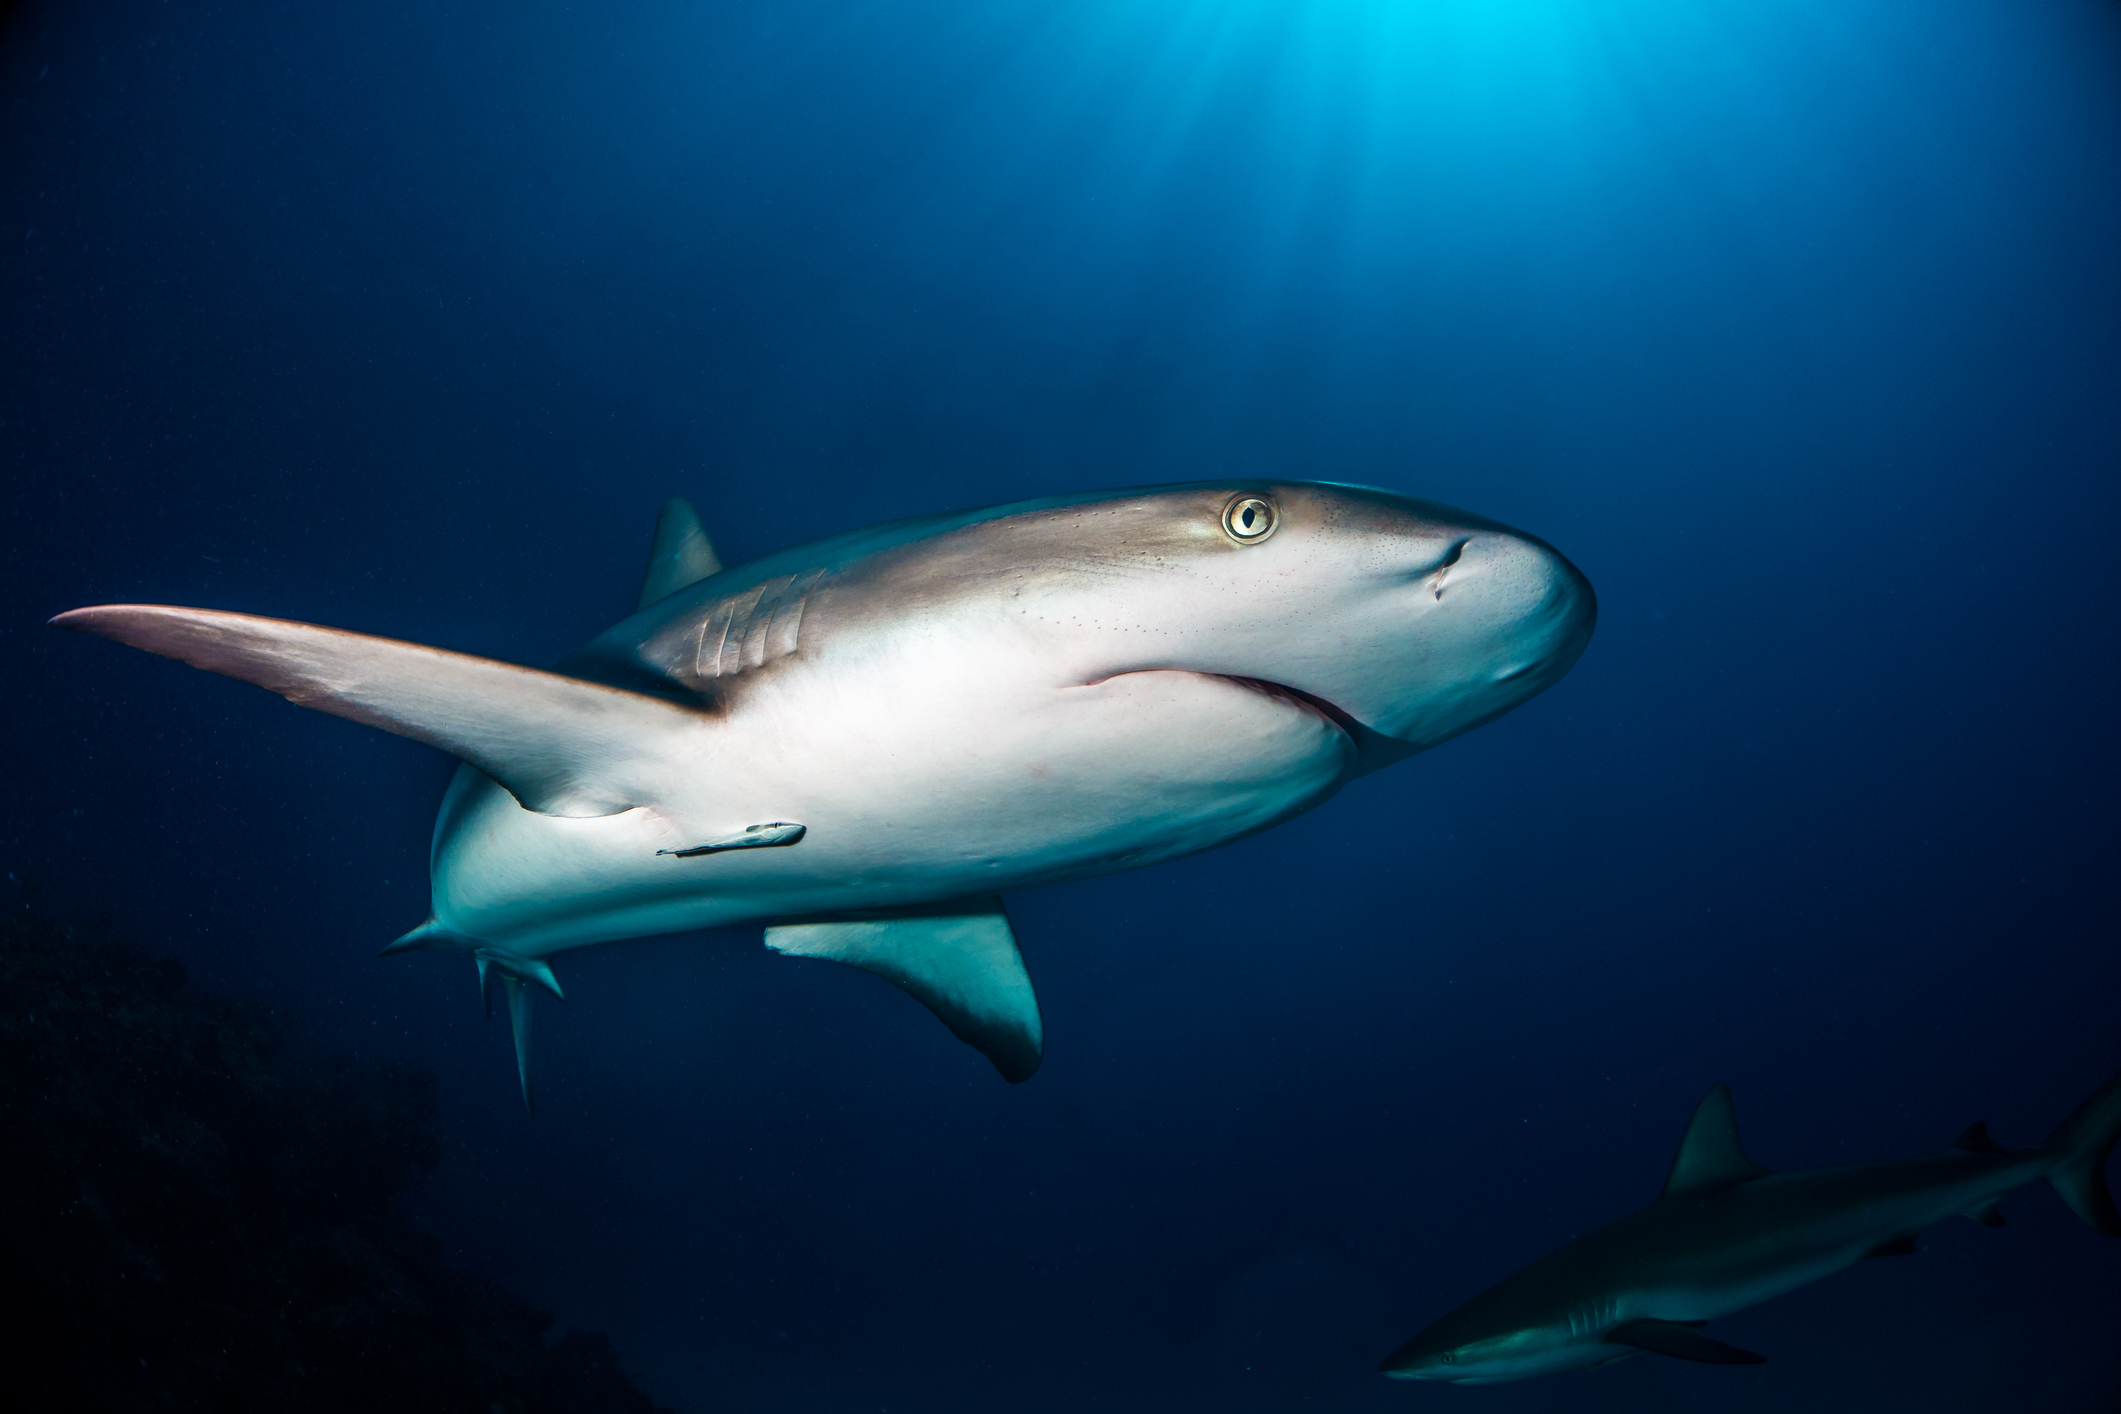 Scuba diver: How to prevent shark attack — on live shark